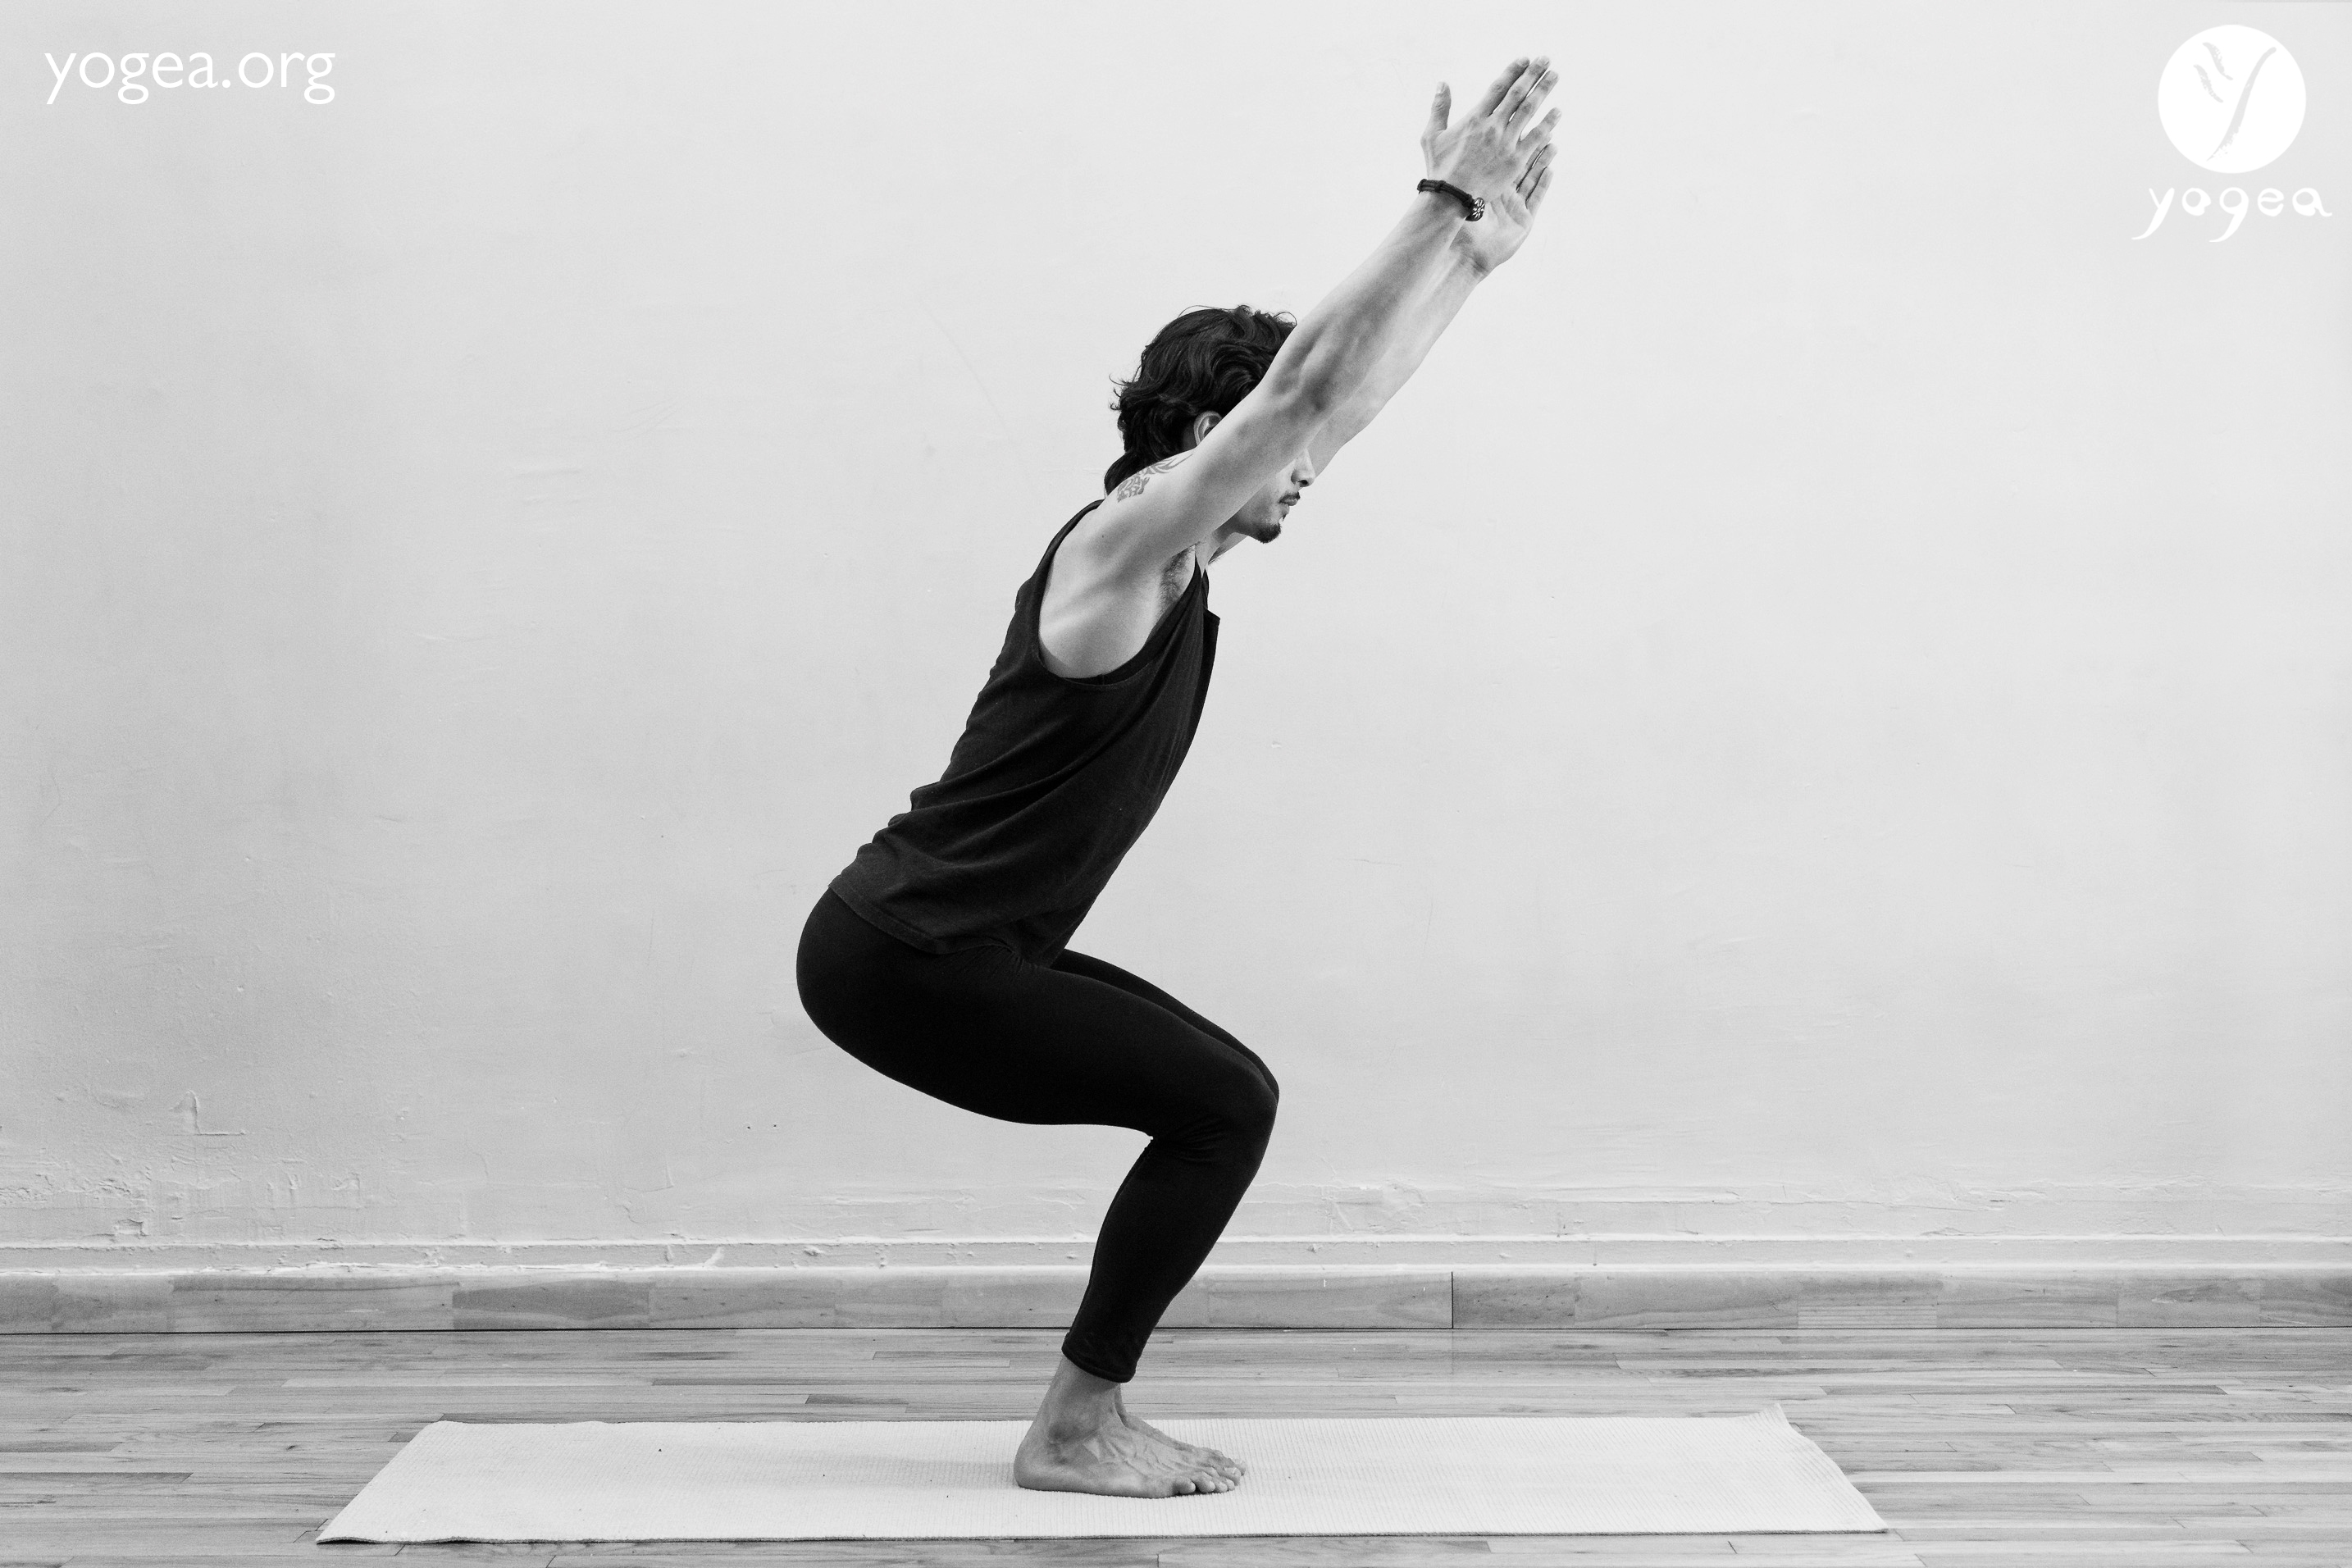 10 Yoga Poses for Winter - For Warm Body and Staying Healthy